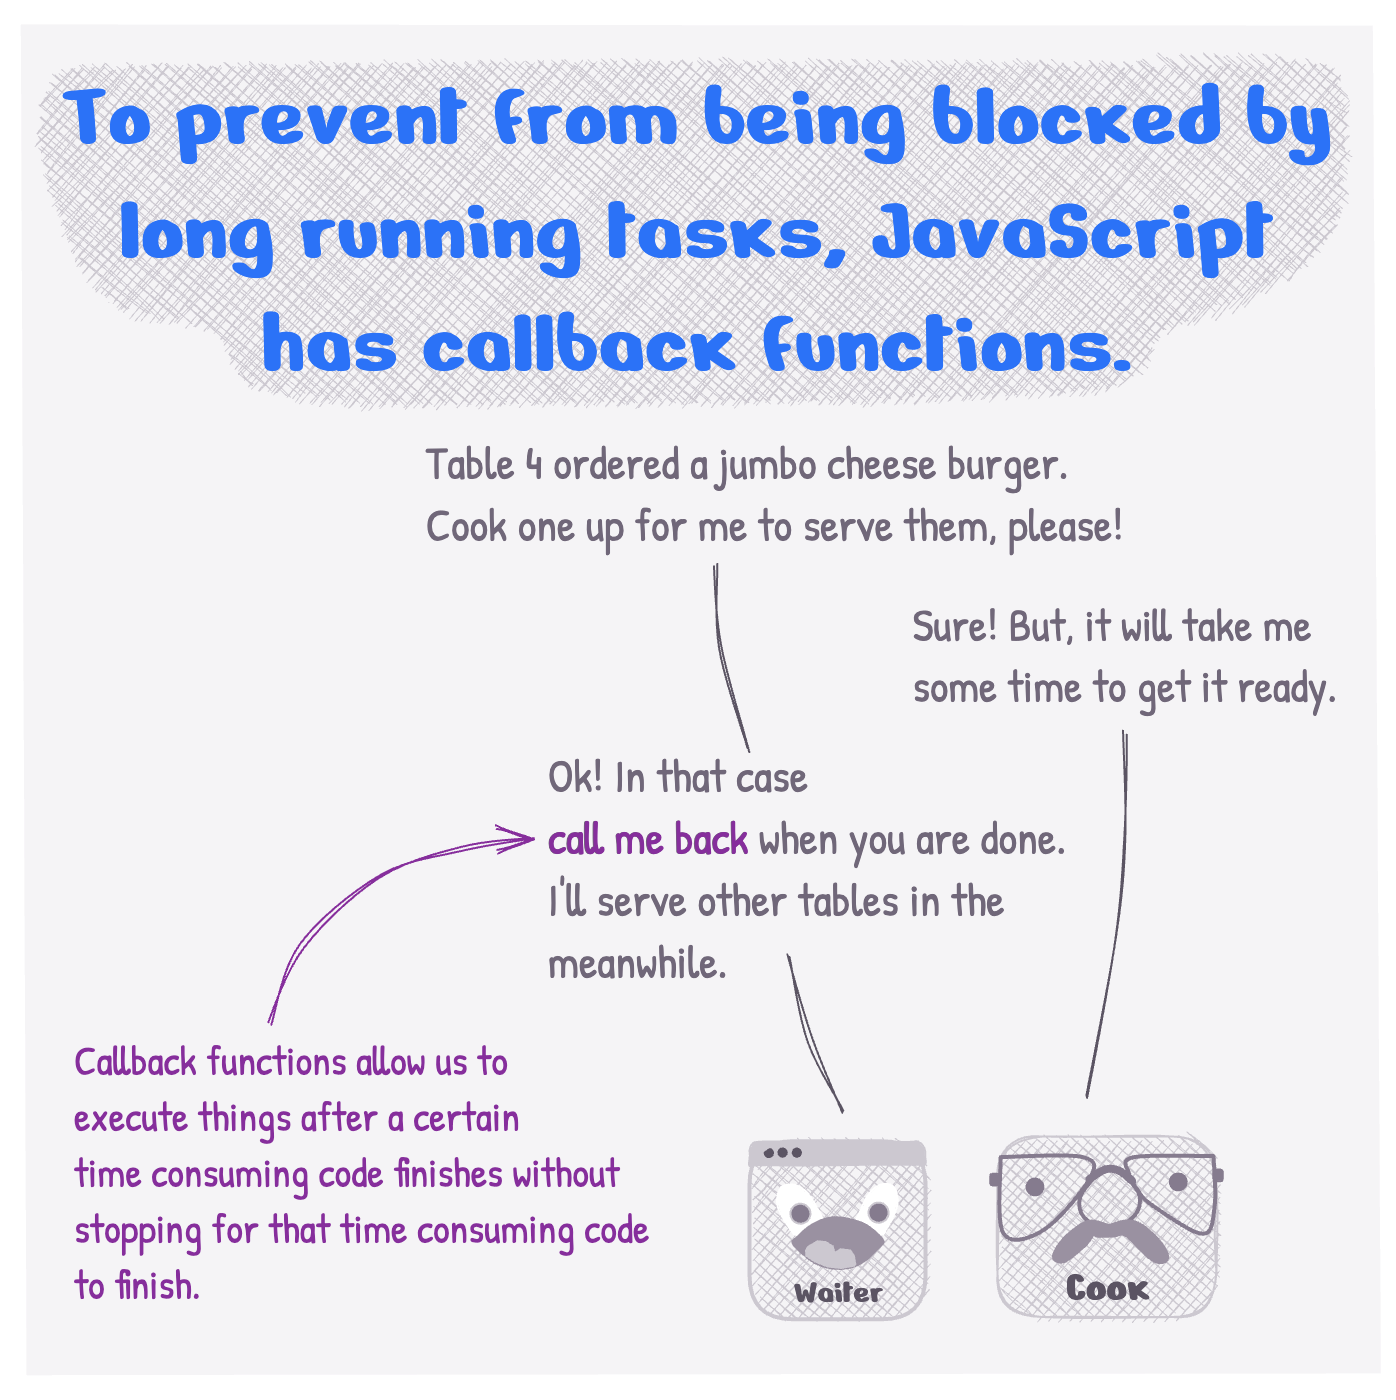 To prevent from being blocked by long running tasks, JavaScript has callback functions. Callback functions allow us to execute things after a certain time consuming code finishes without stopping for that time consuming code to finish.